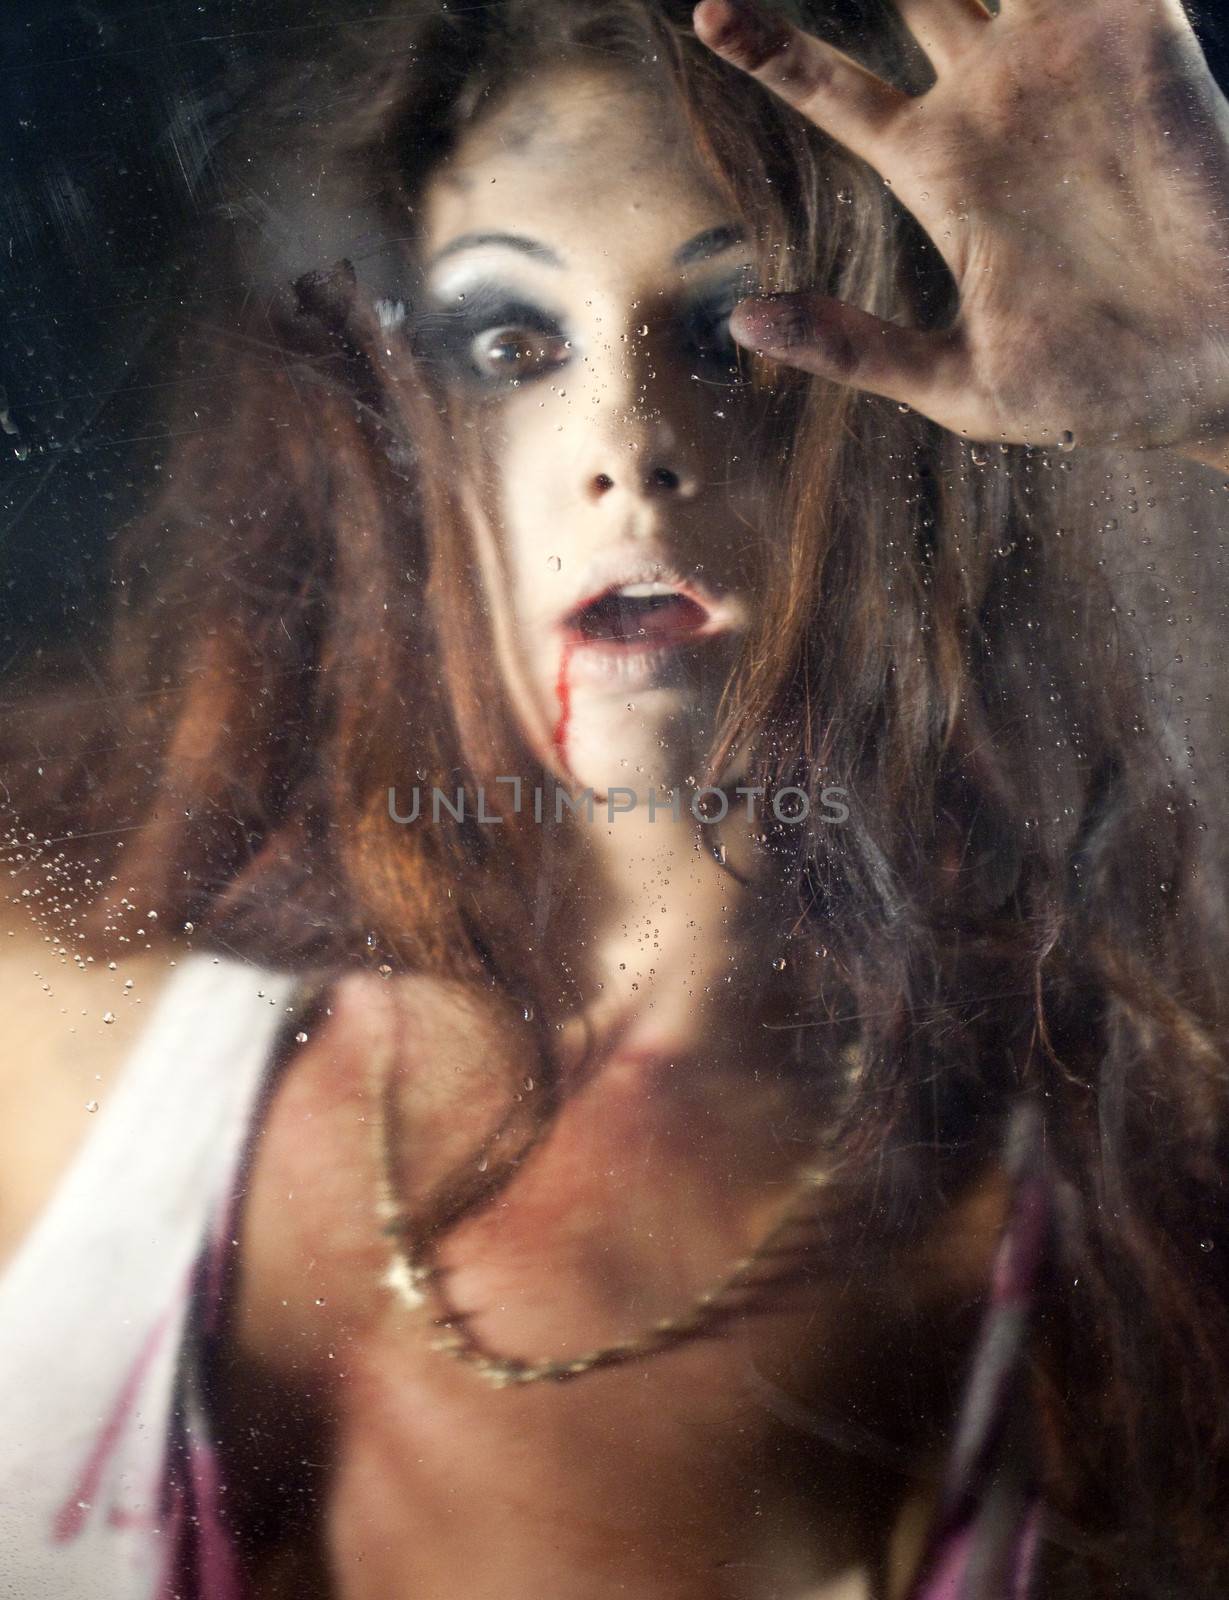 Frightened woman behind the glass by andersonrise